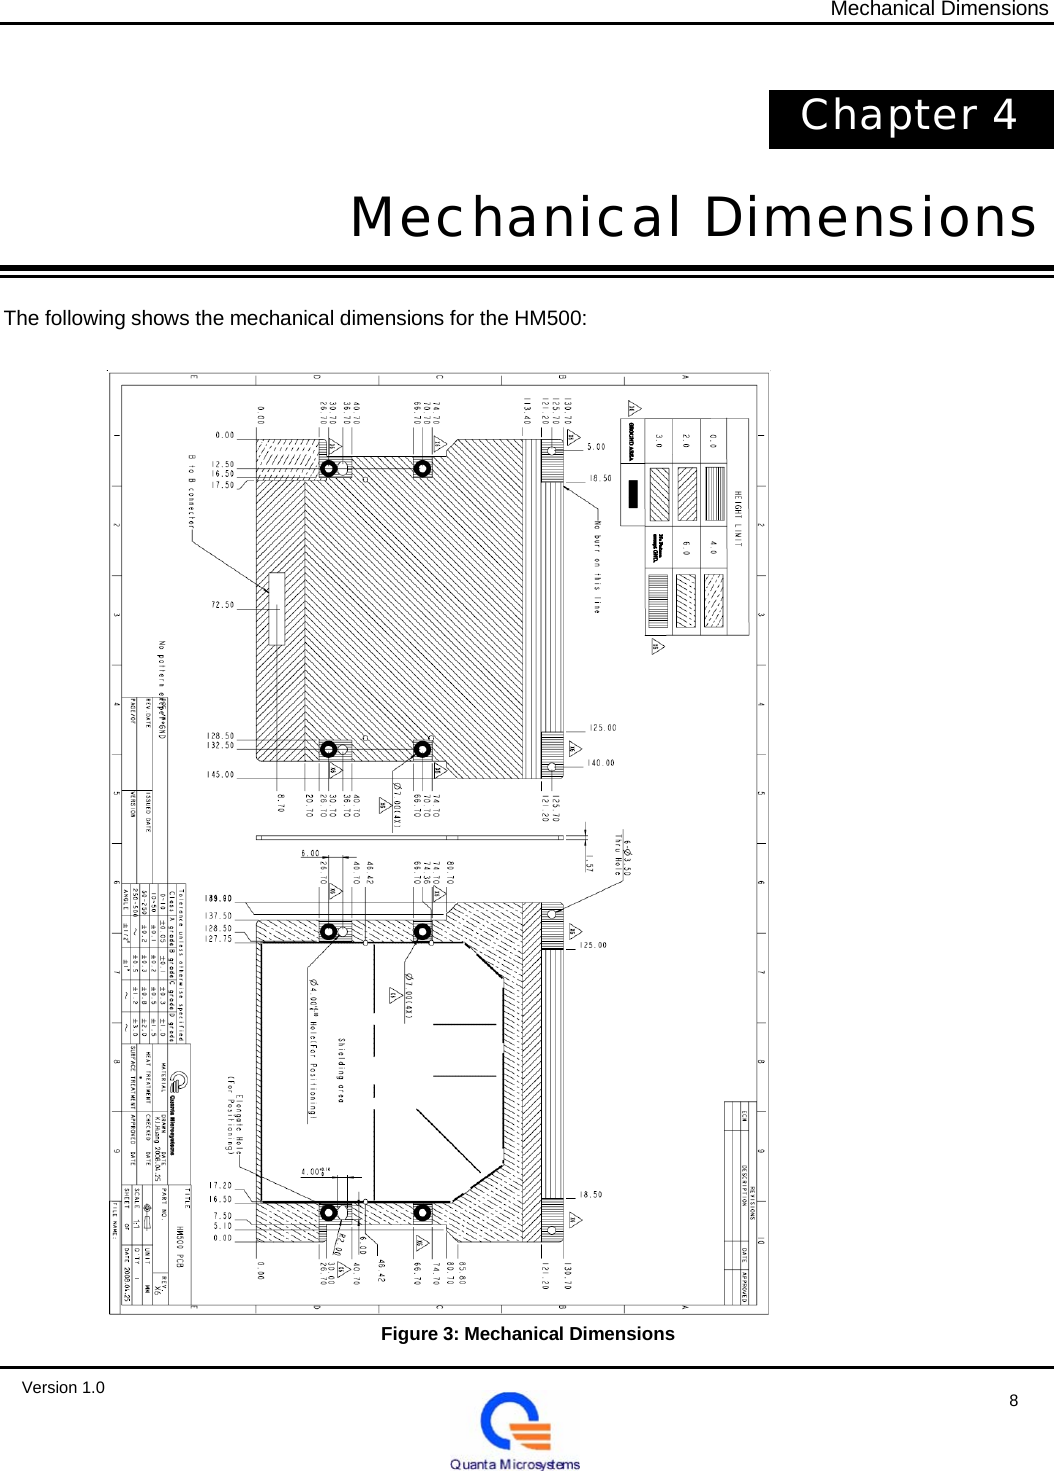   Mechanical Dimensions     Chapter 4    Mechanical Dimensions    The following shows the mechanical dimensions for the HM500:                                               Figure 3: Mechanical Dimensions  Version 1.0  8 